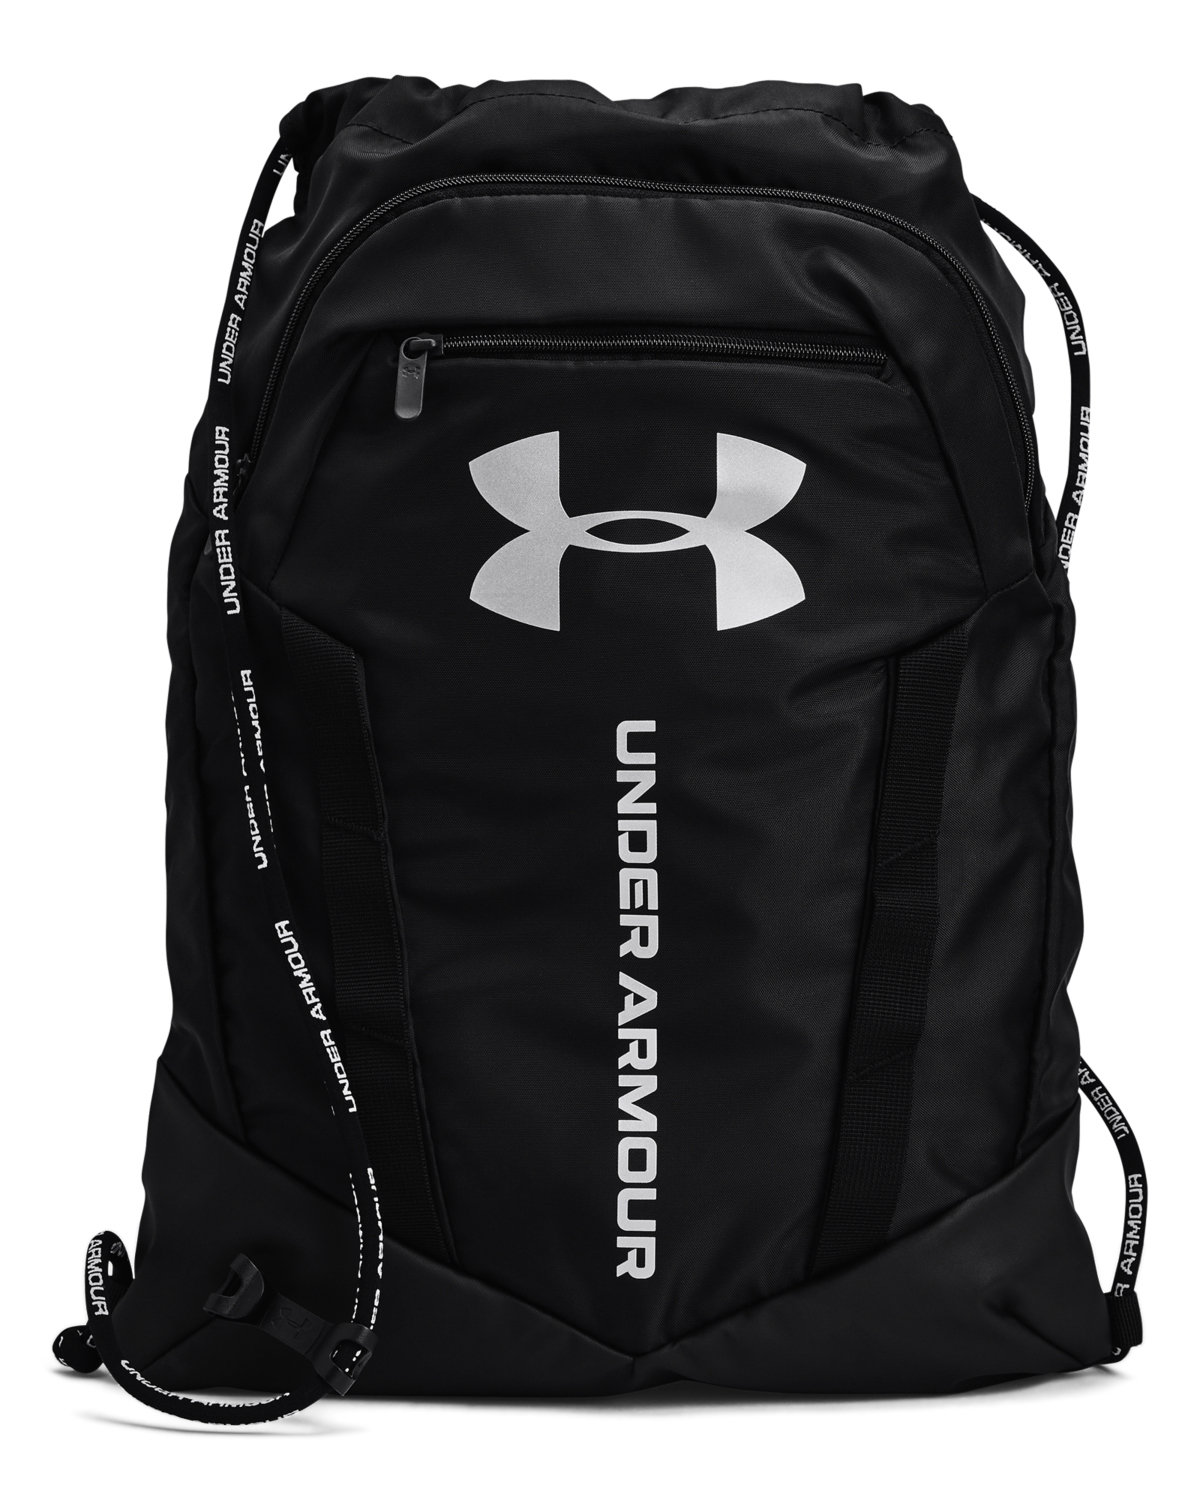 Under Armour 1369220 - Undeniable Sack Pack